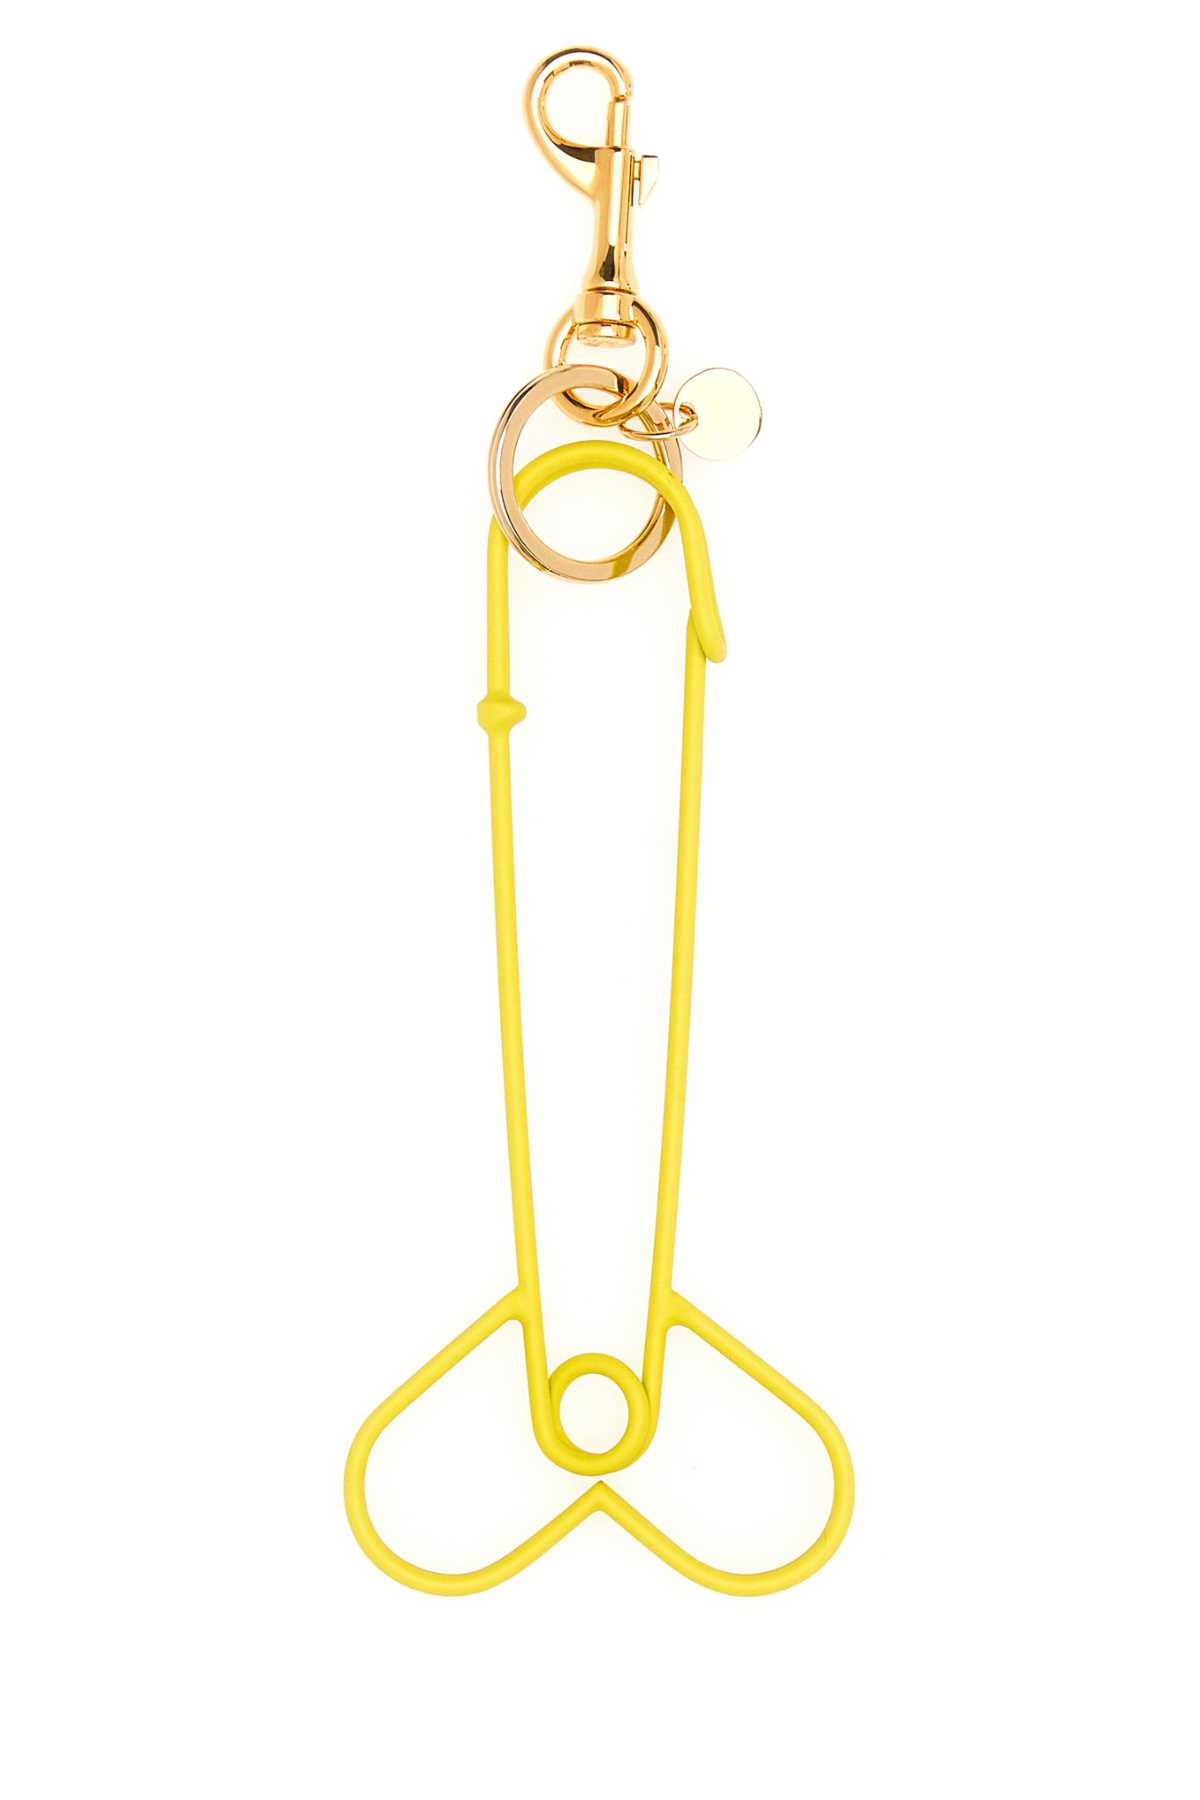 JW ANDERSON FLUO YELLOW METAL KEY RING